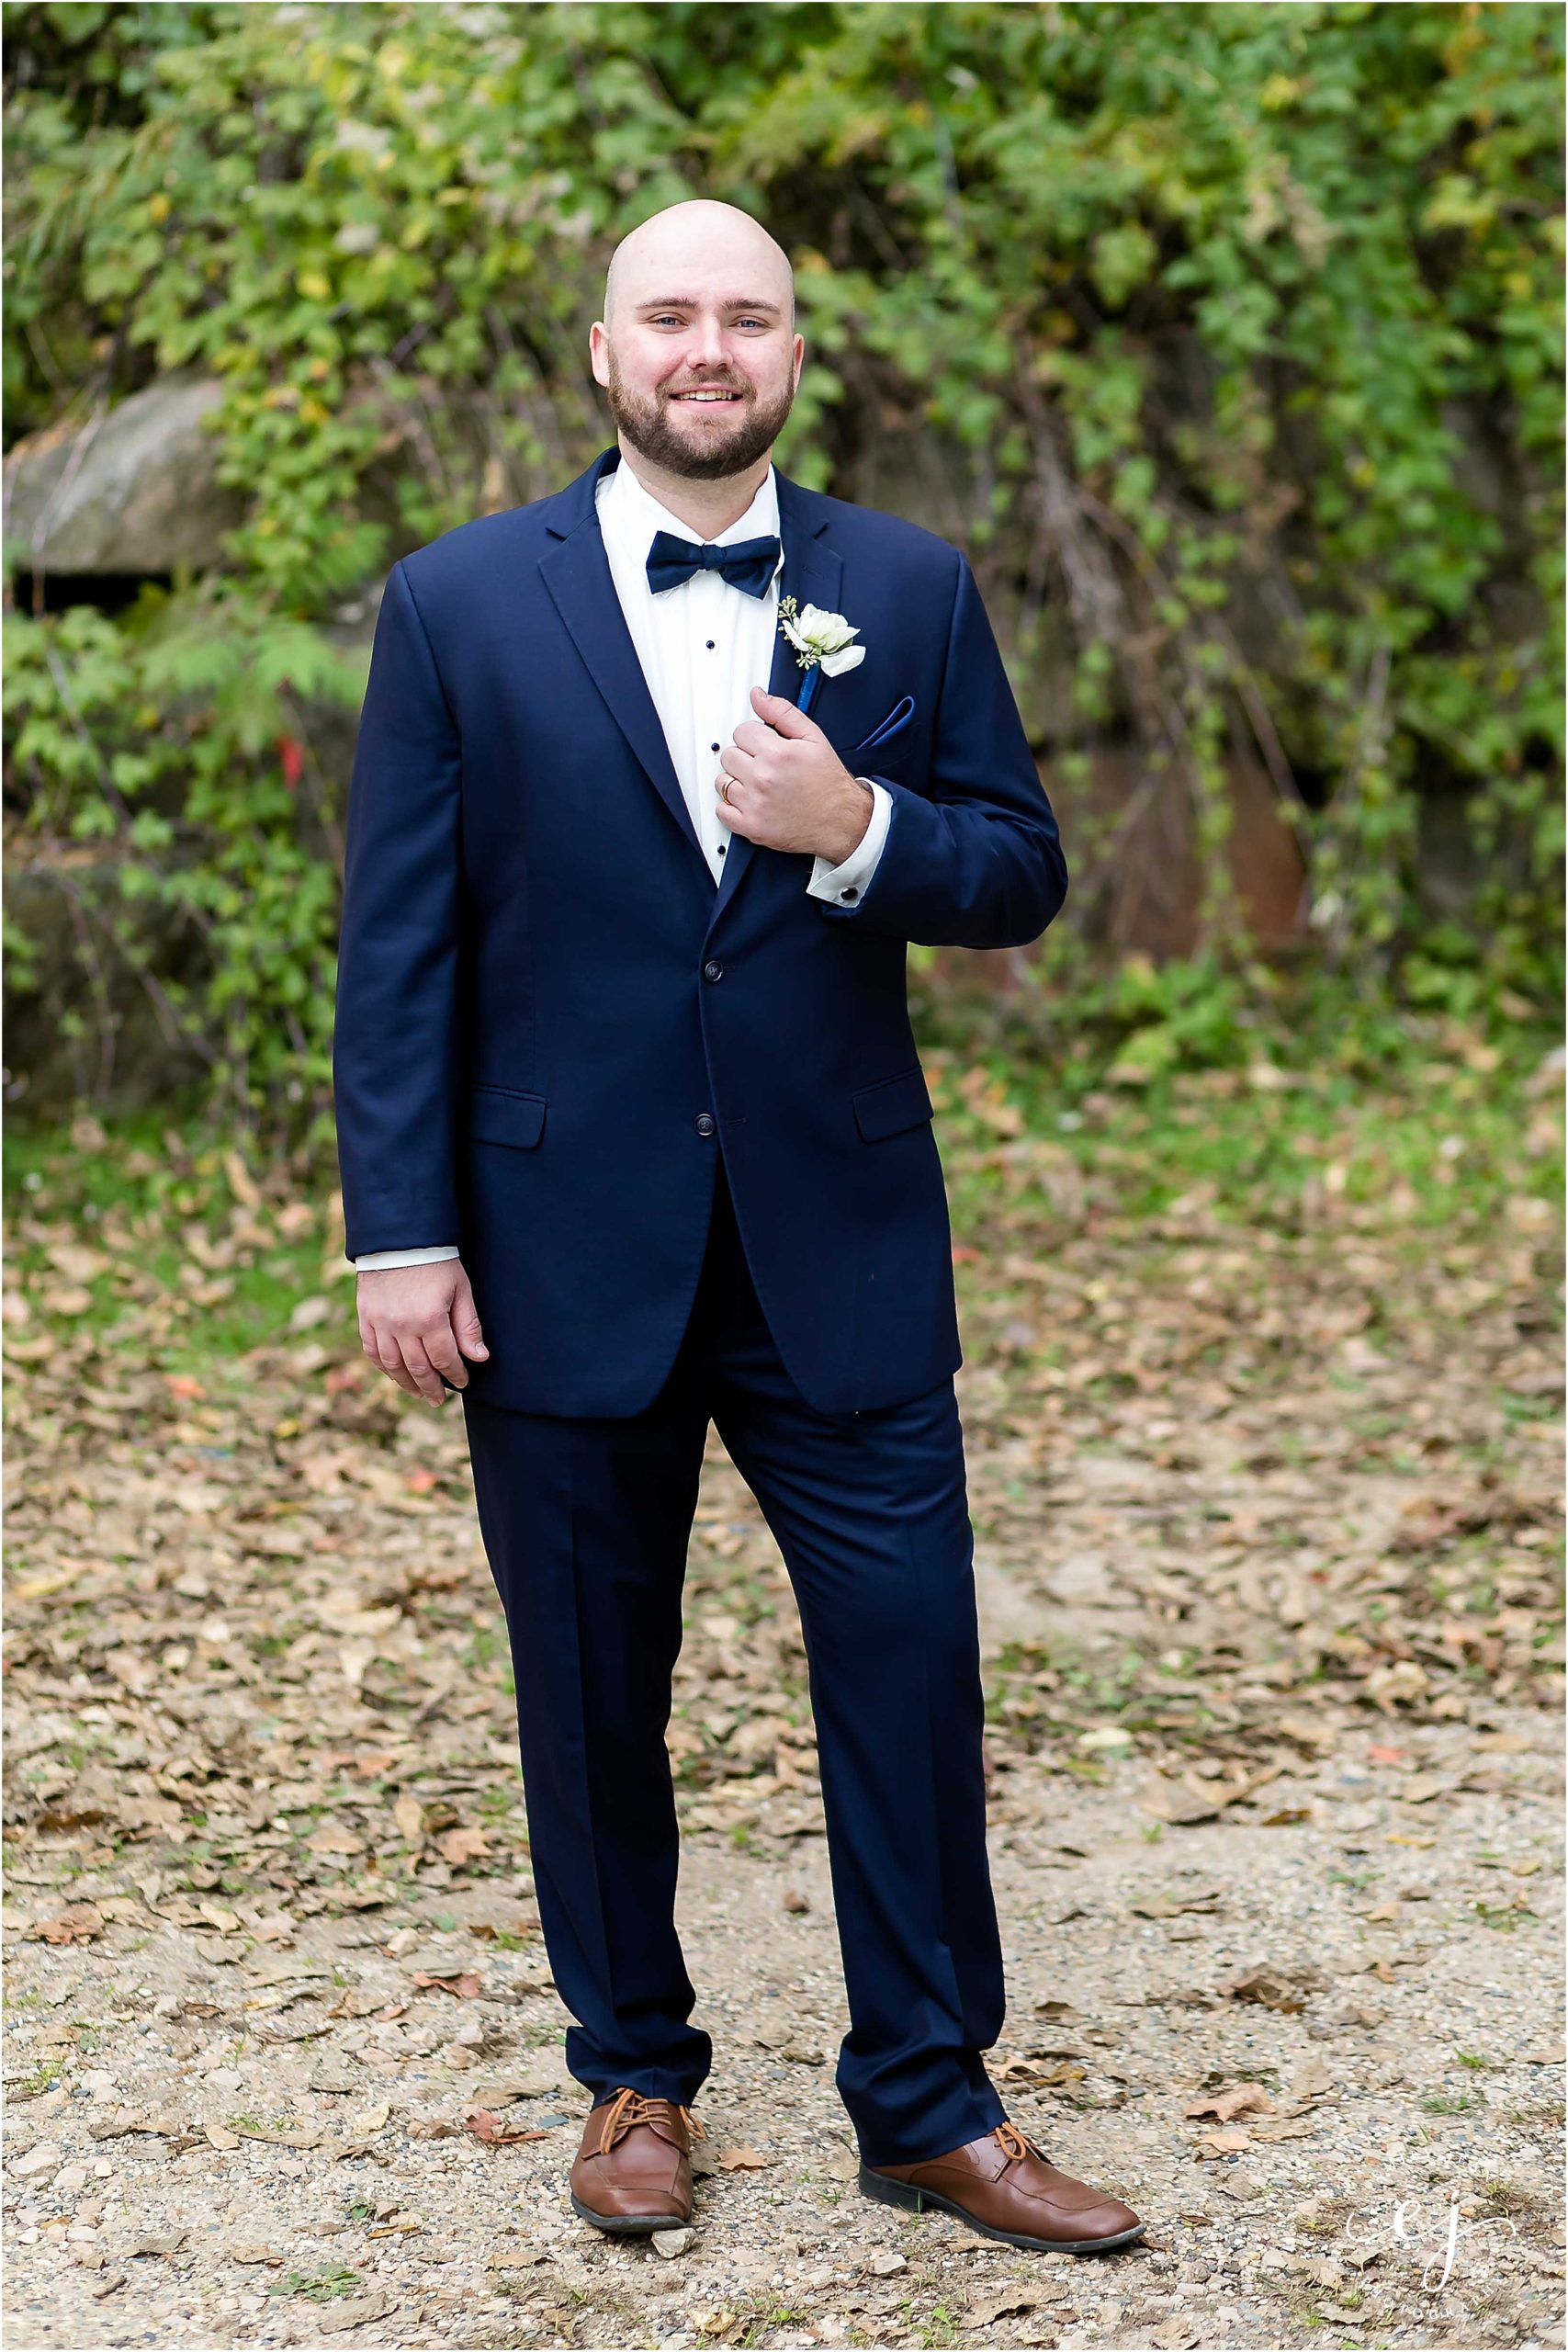 Professional portrait of a groom wearing a navy tuxedo with navy bowtie and white boutonniere